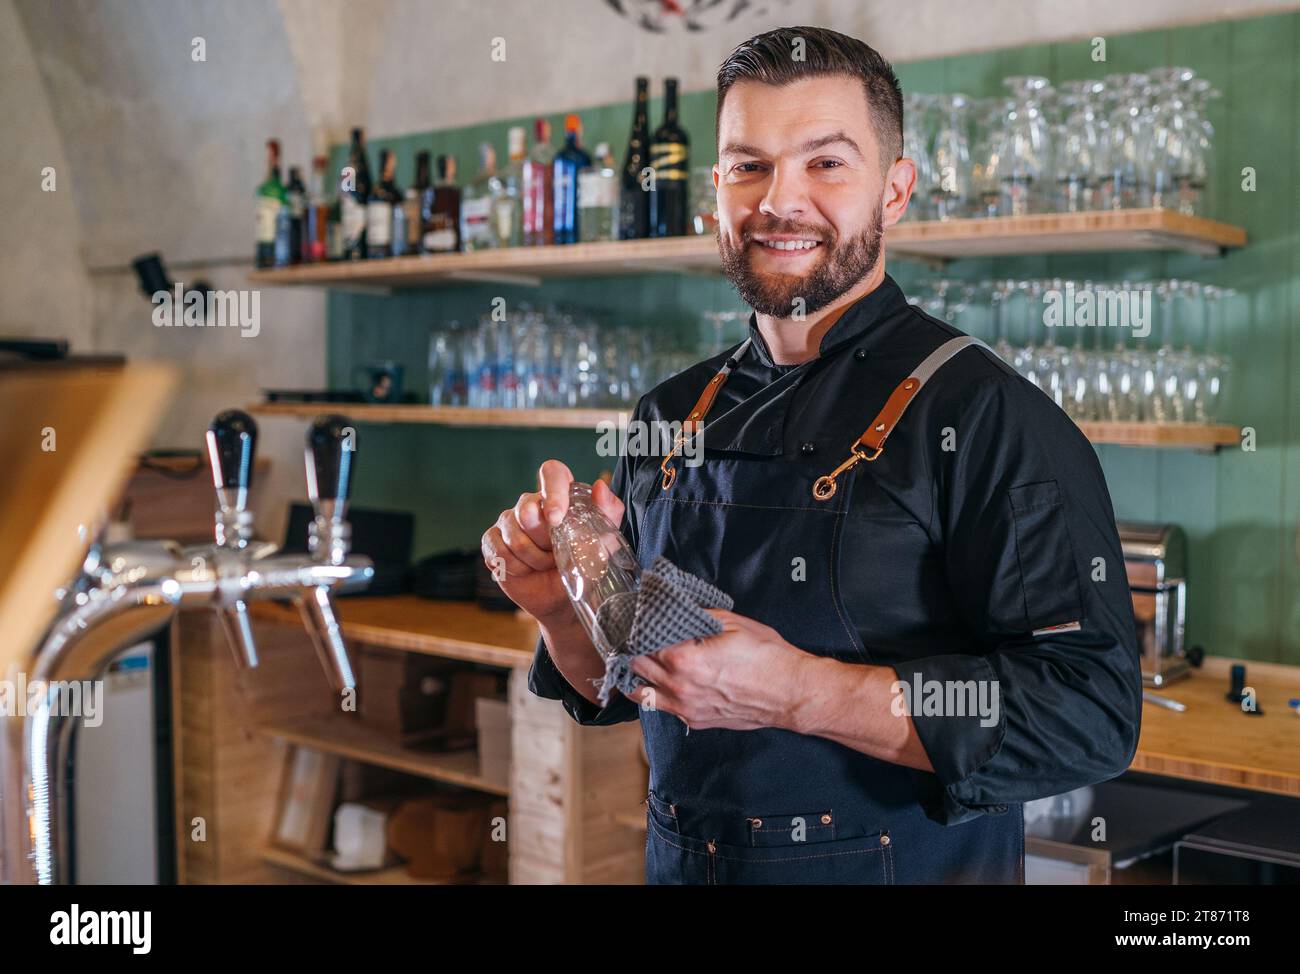 https://c8.alamy.com/comp/2T871T8/portrait-of-happy-smiling-bearded-barman-dressed-in-a-black-uniform-with-an-apron-wiping-the-beer-glass-at-bar-counter-successful-people-hard-work-2T871T8.jpg